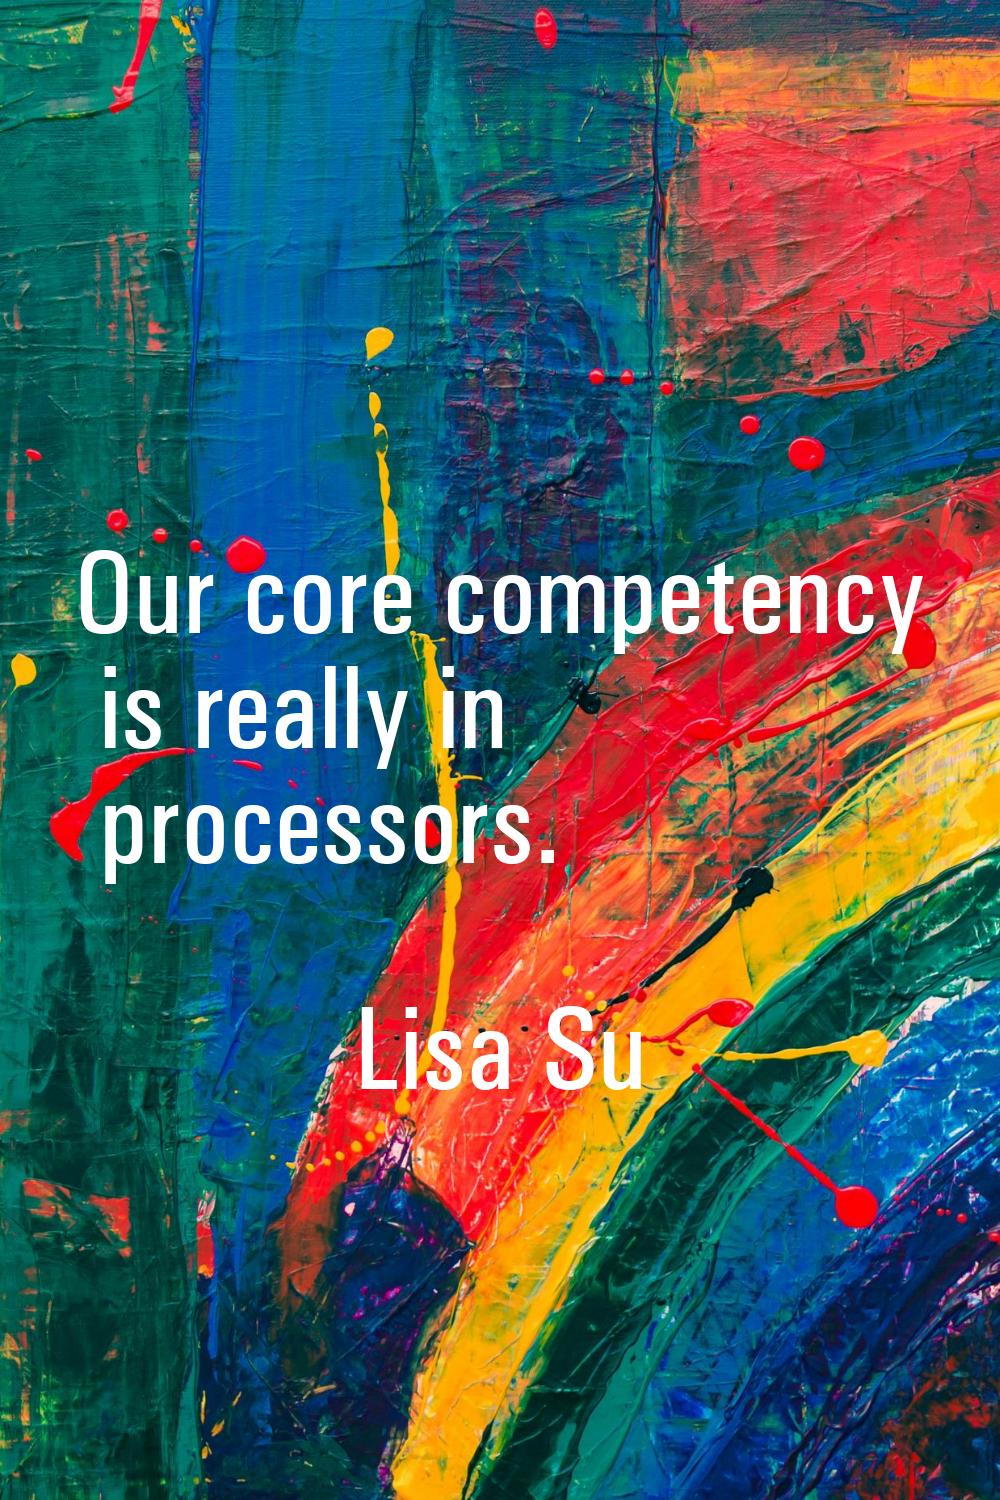 Our core competency is really in processors.